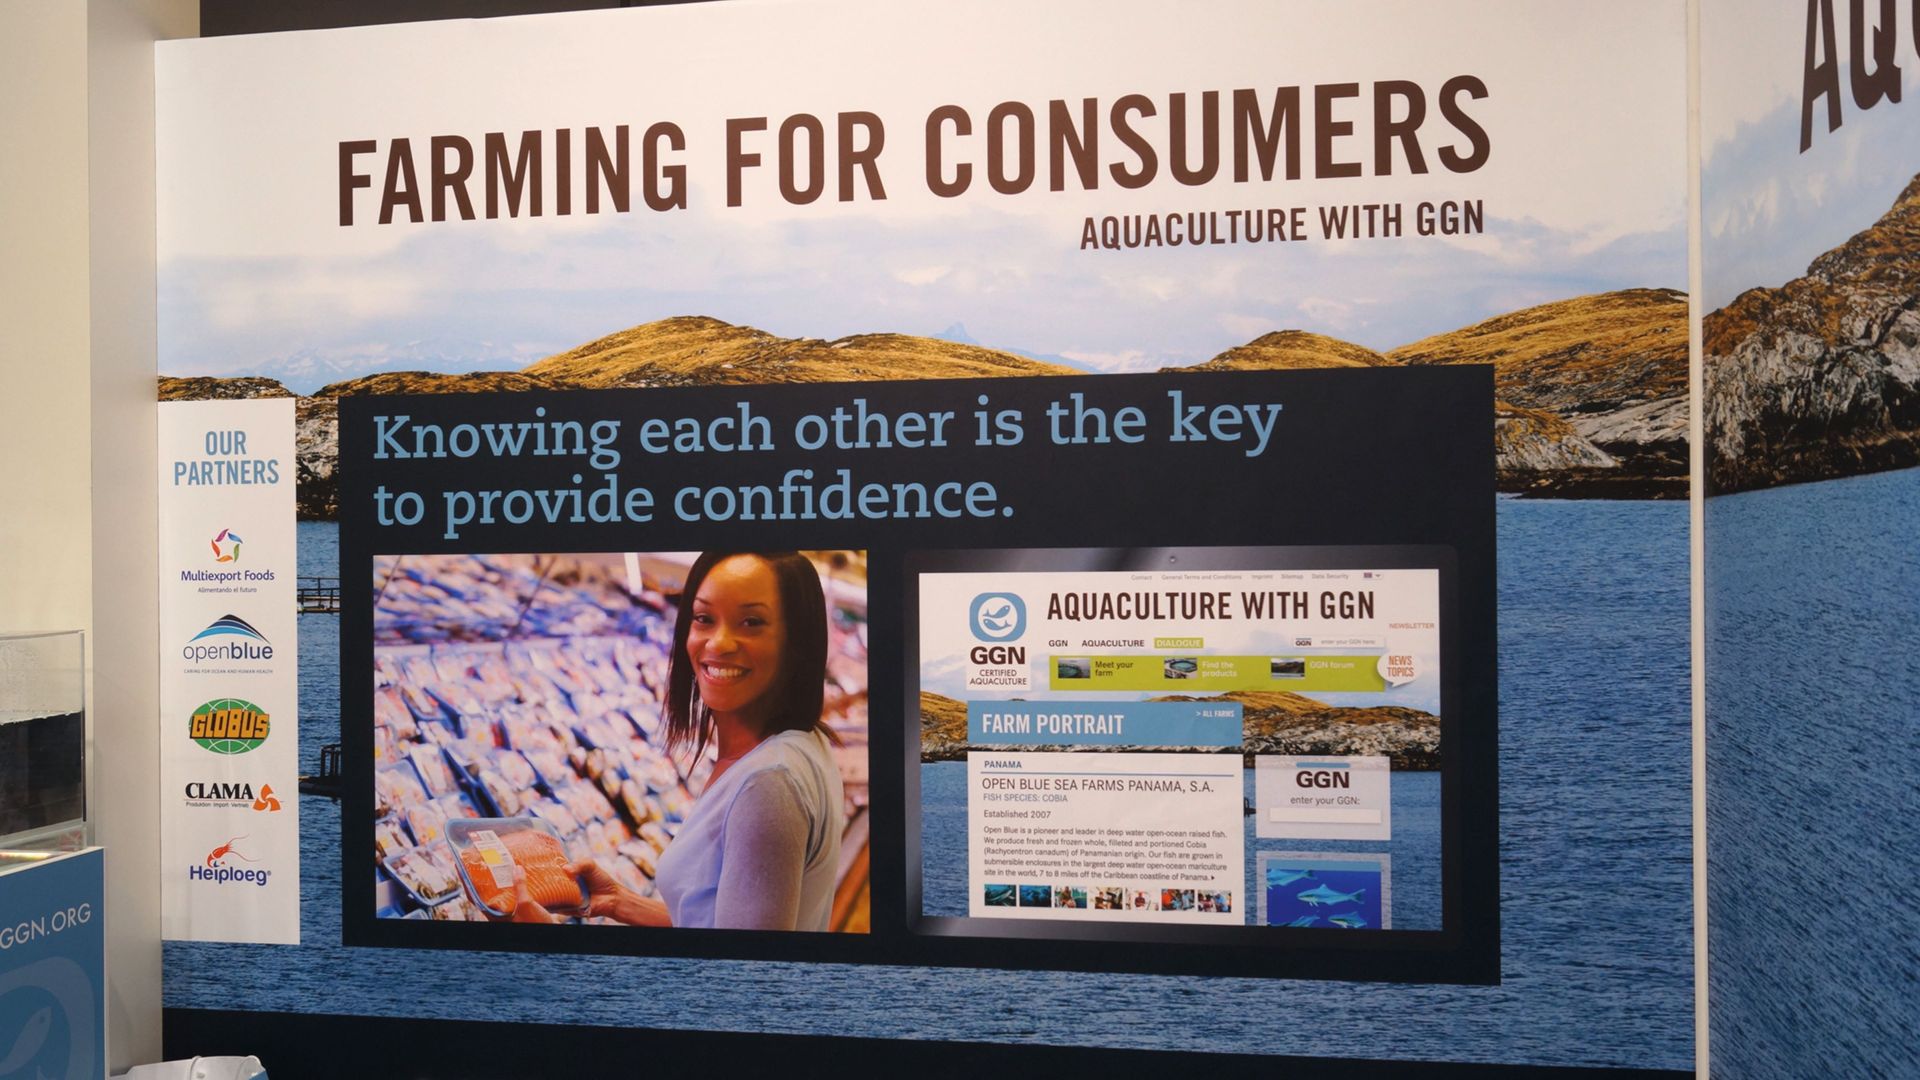 The launch of the GGN label for aquaculture, the first consumer-facing communication channel based on GLOBALG.A.P. certification